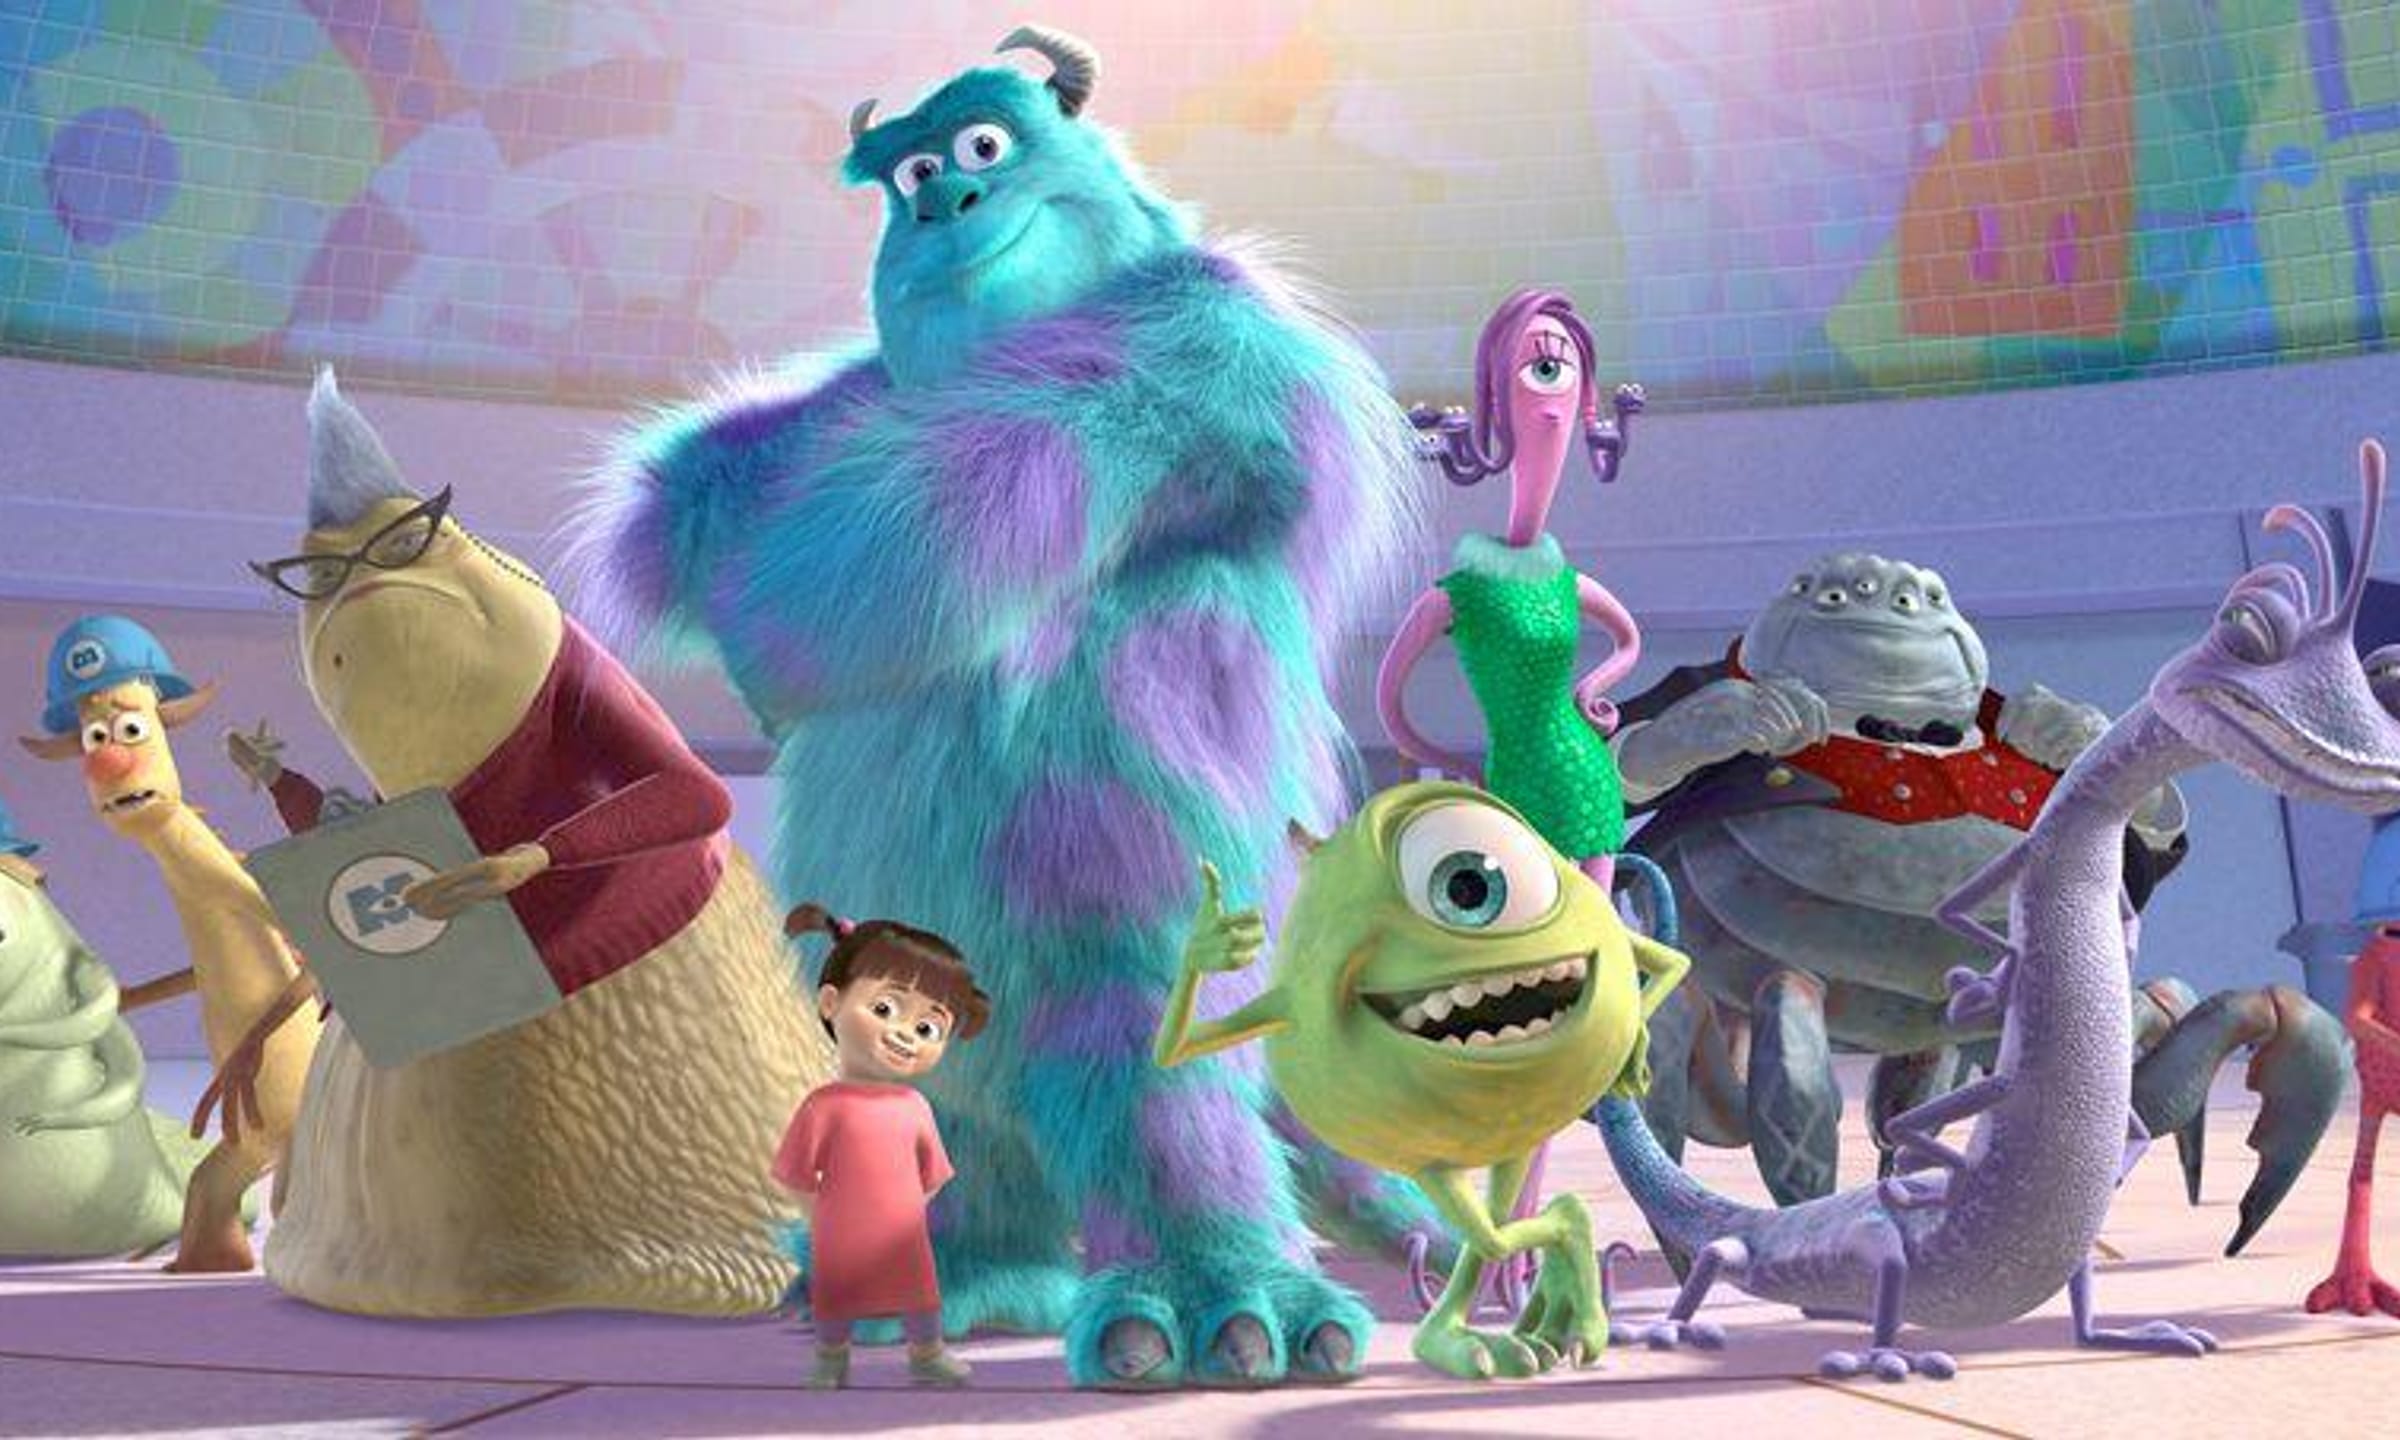 The Cutest Monsters In The 'Monsters, Inc.' Franchise, Ranked